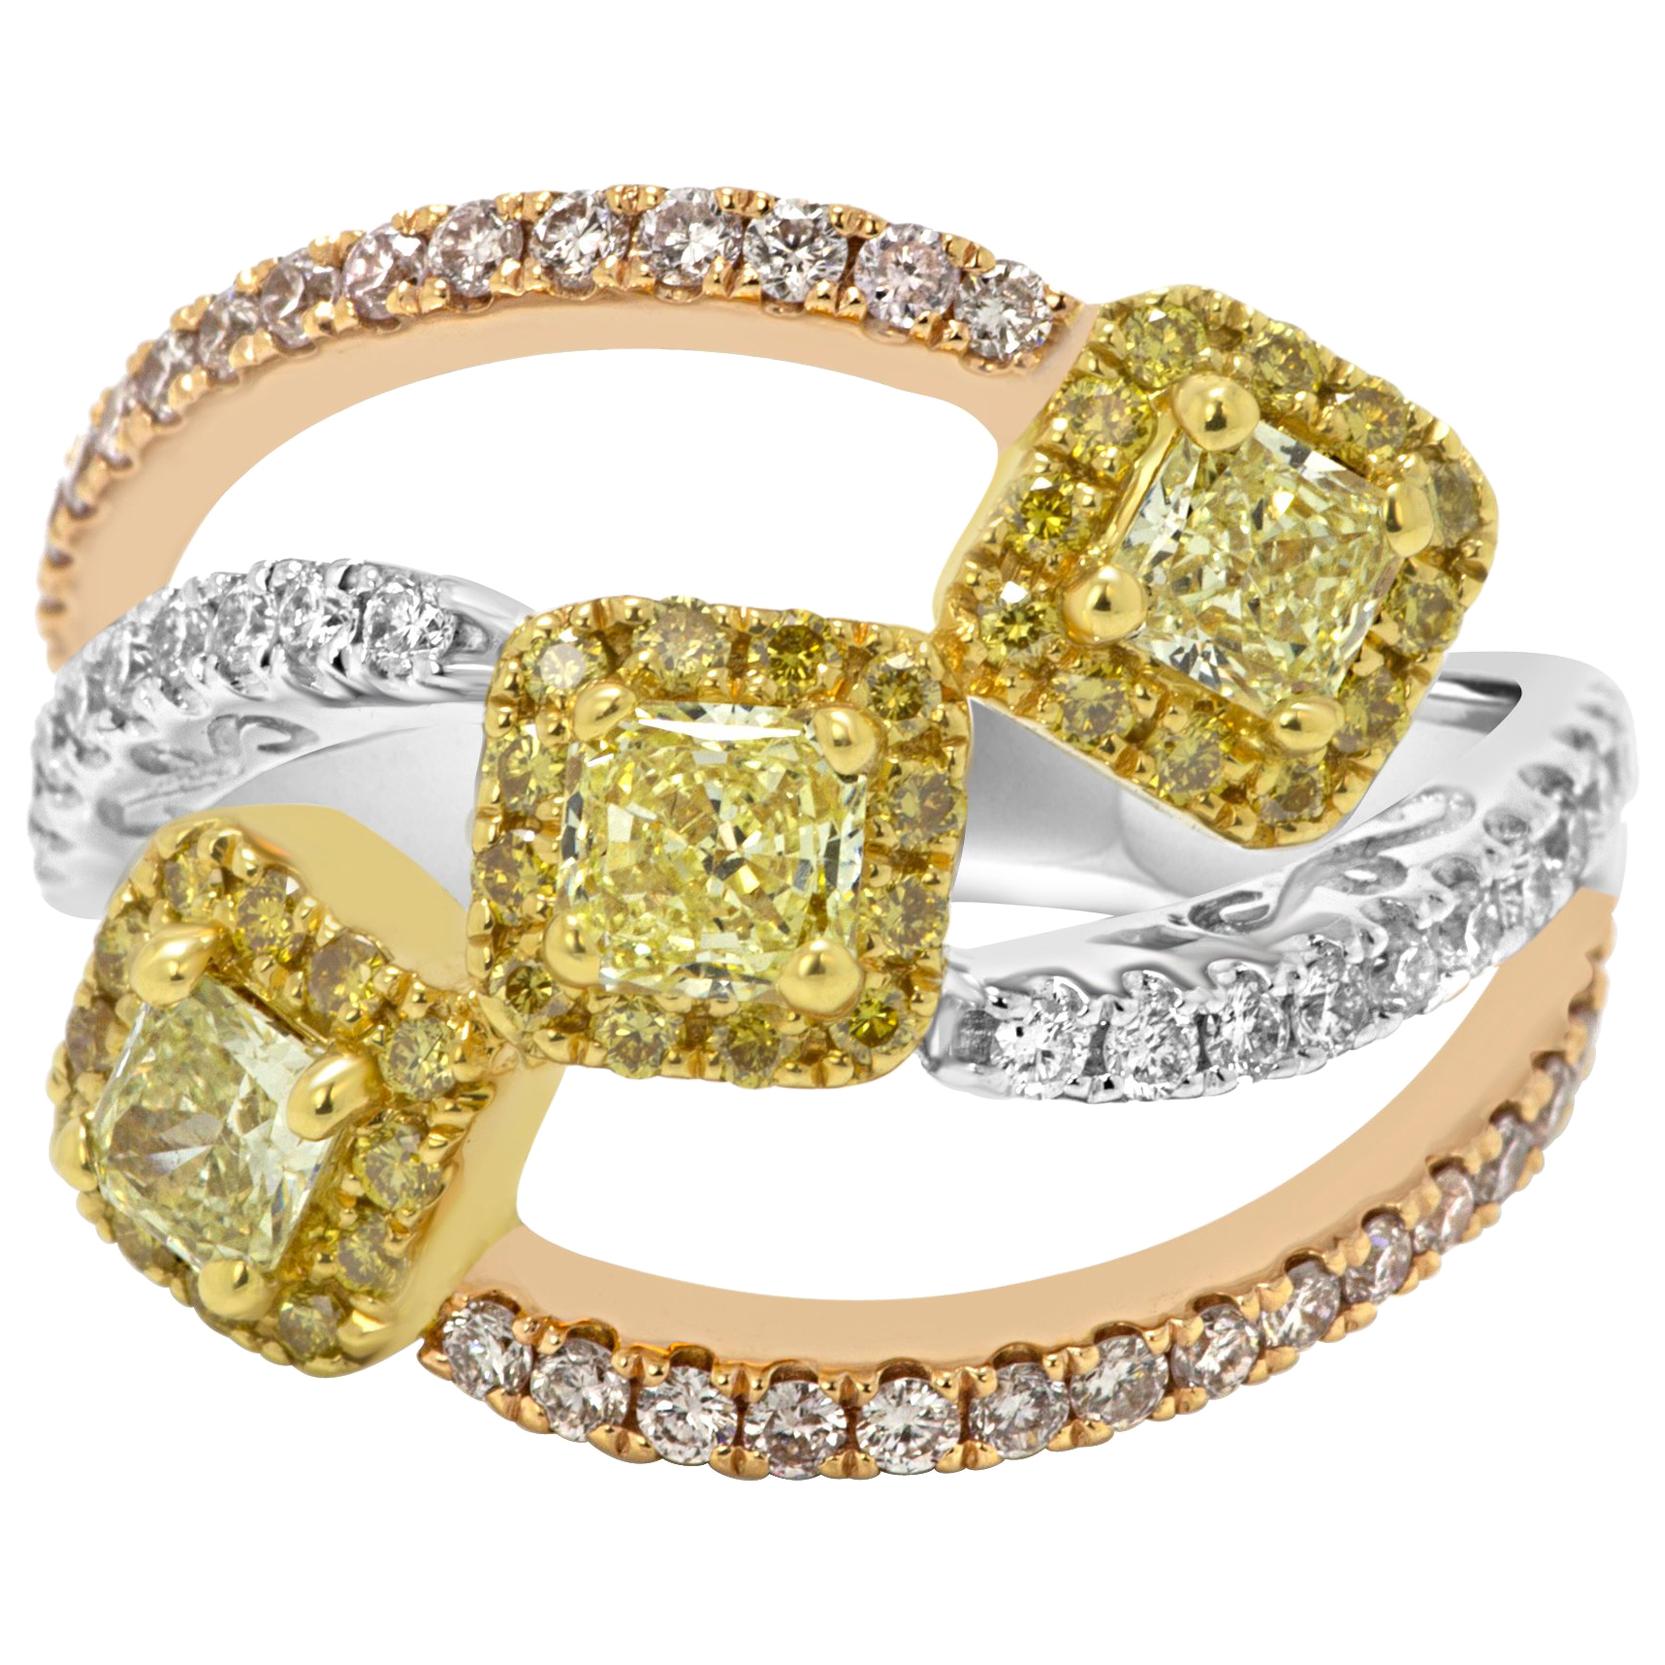 Natural Fancy Yellow and Pink Diamond White Diamond Three-Color Gold Halo Ring